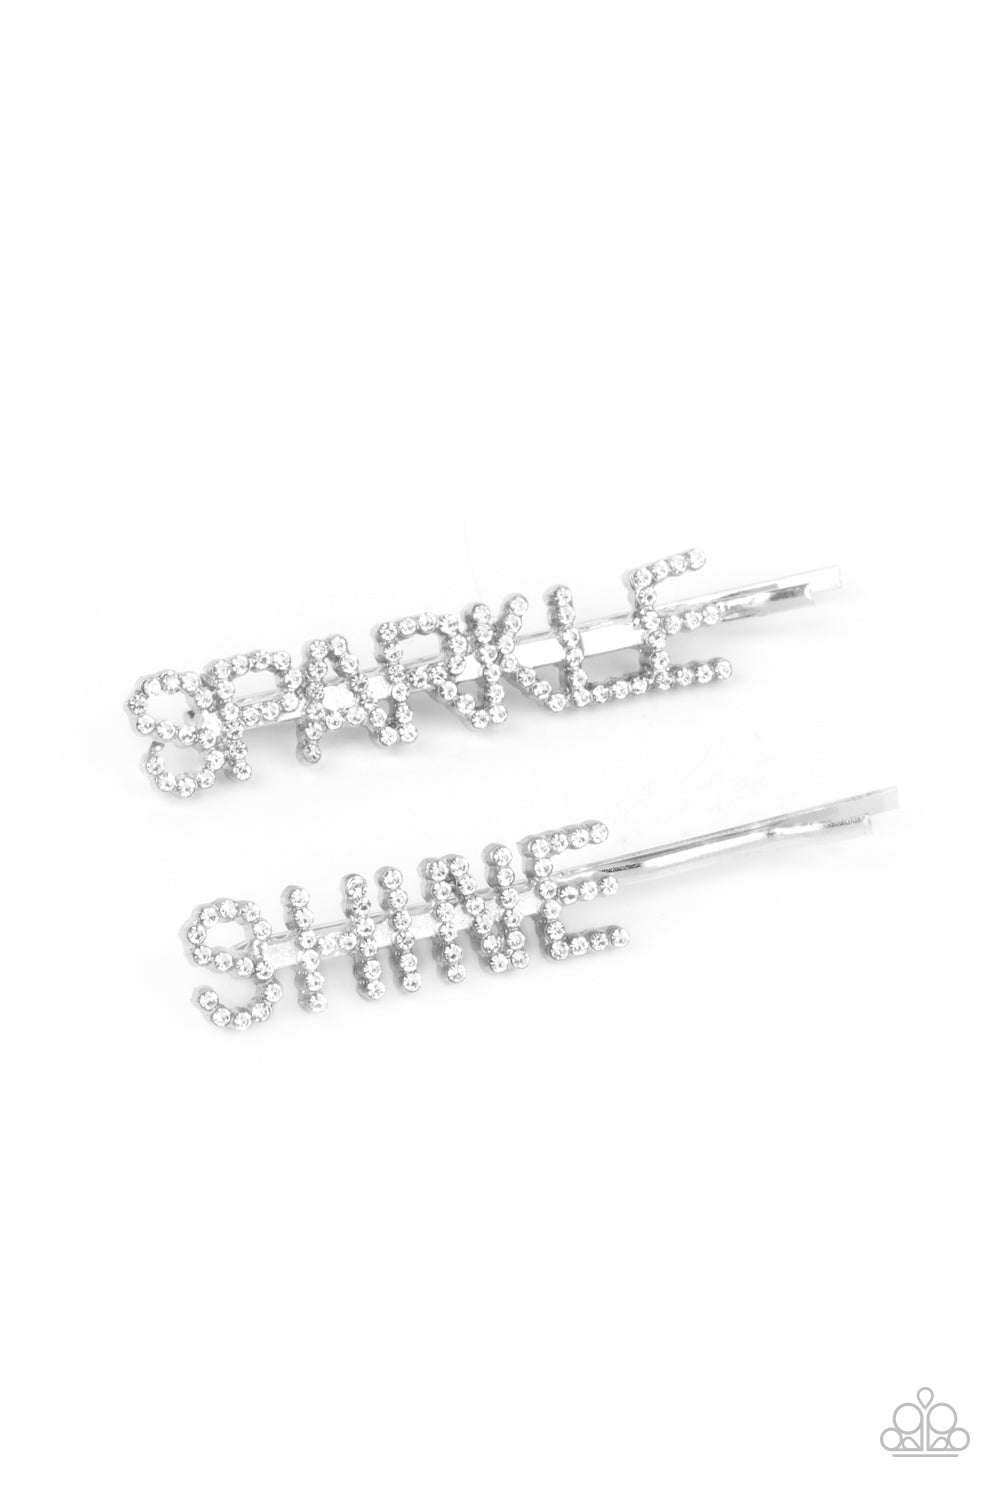 Center of the SPARKLE-verse - White Pins - Paparazzi Accessories - Paparazzi Accessories 